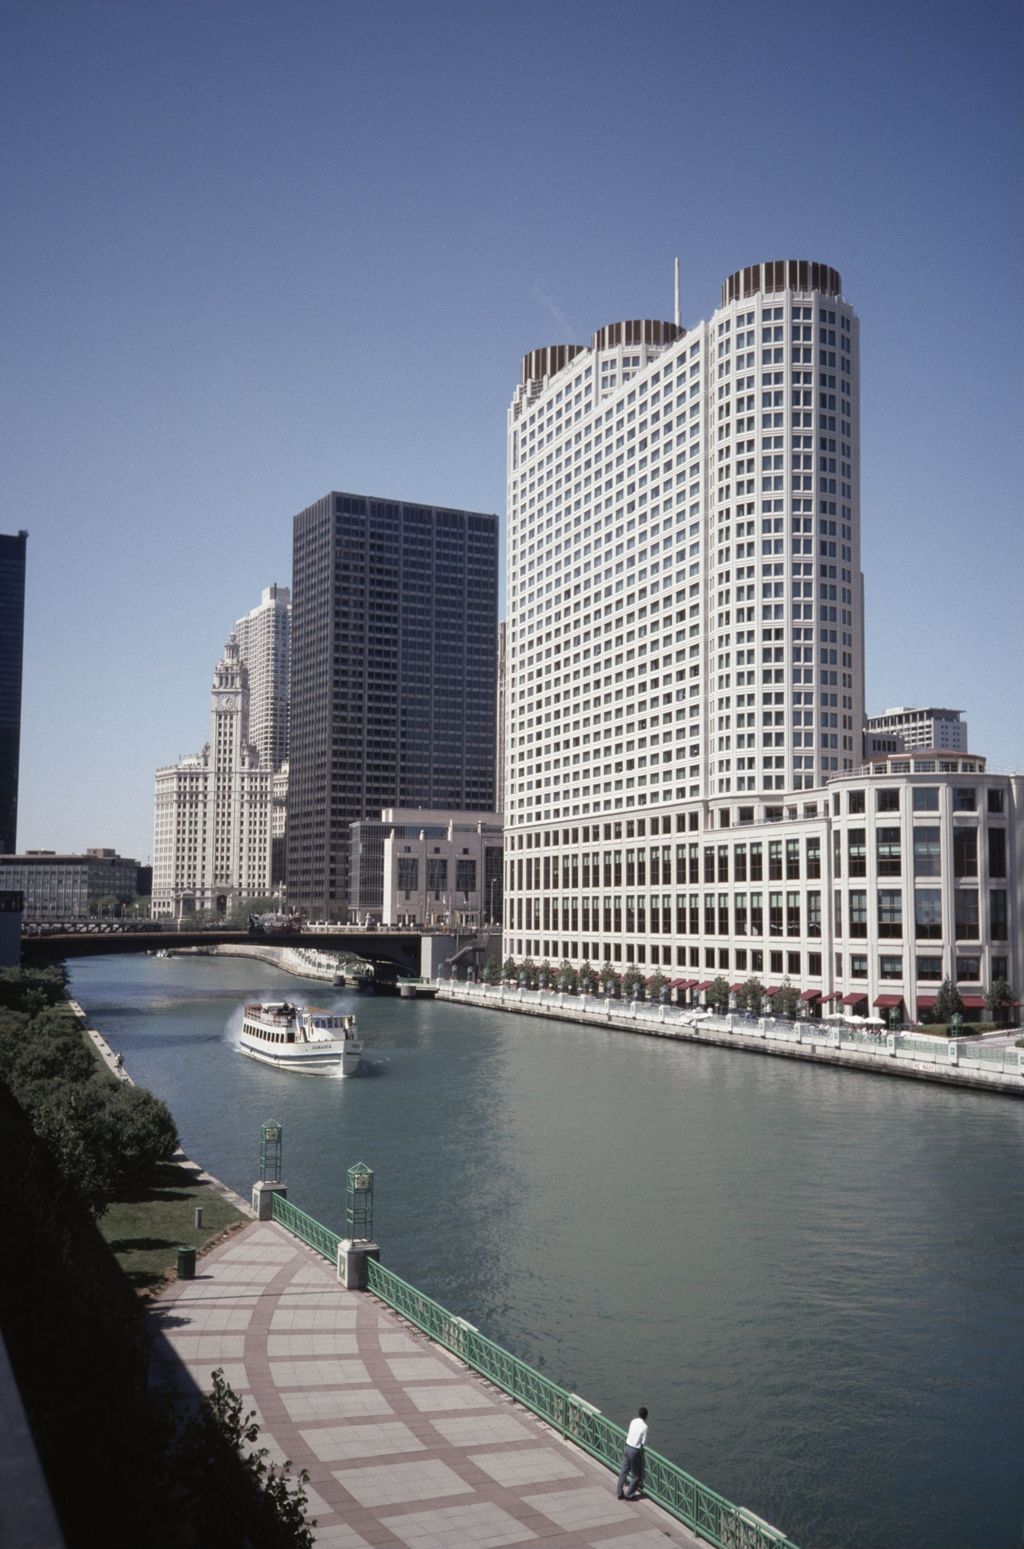 Miniature of Chicago River and Sheraton Hotel